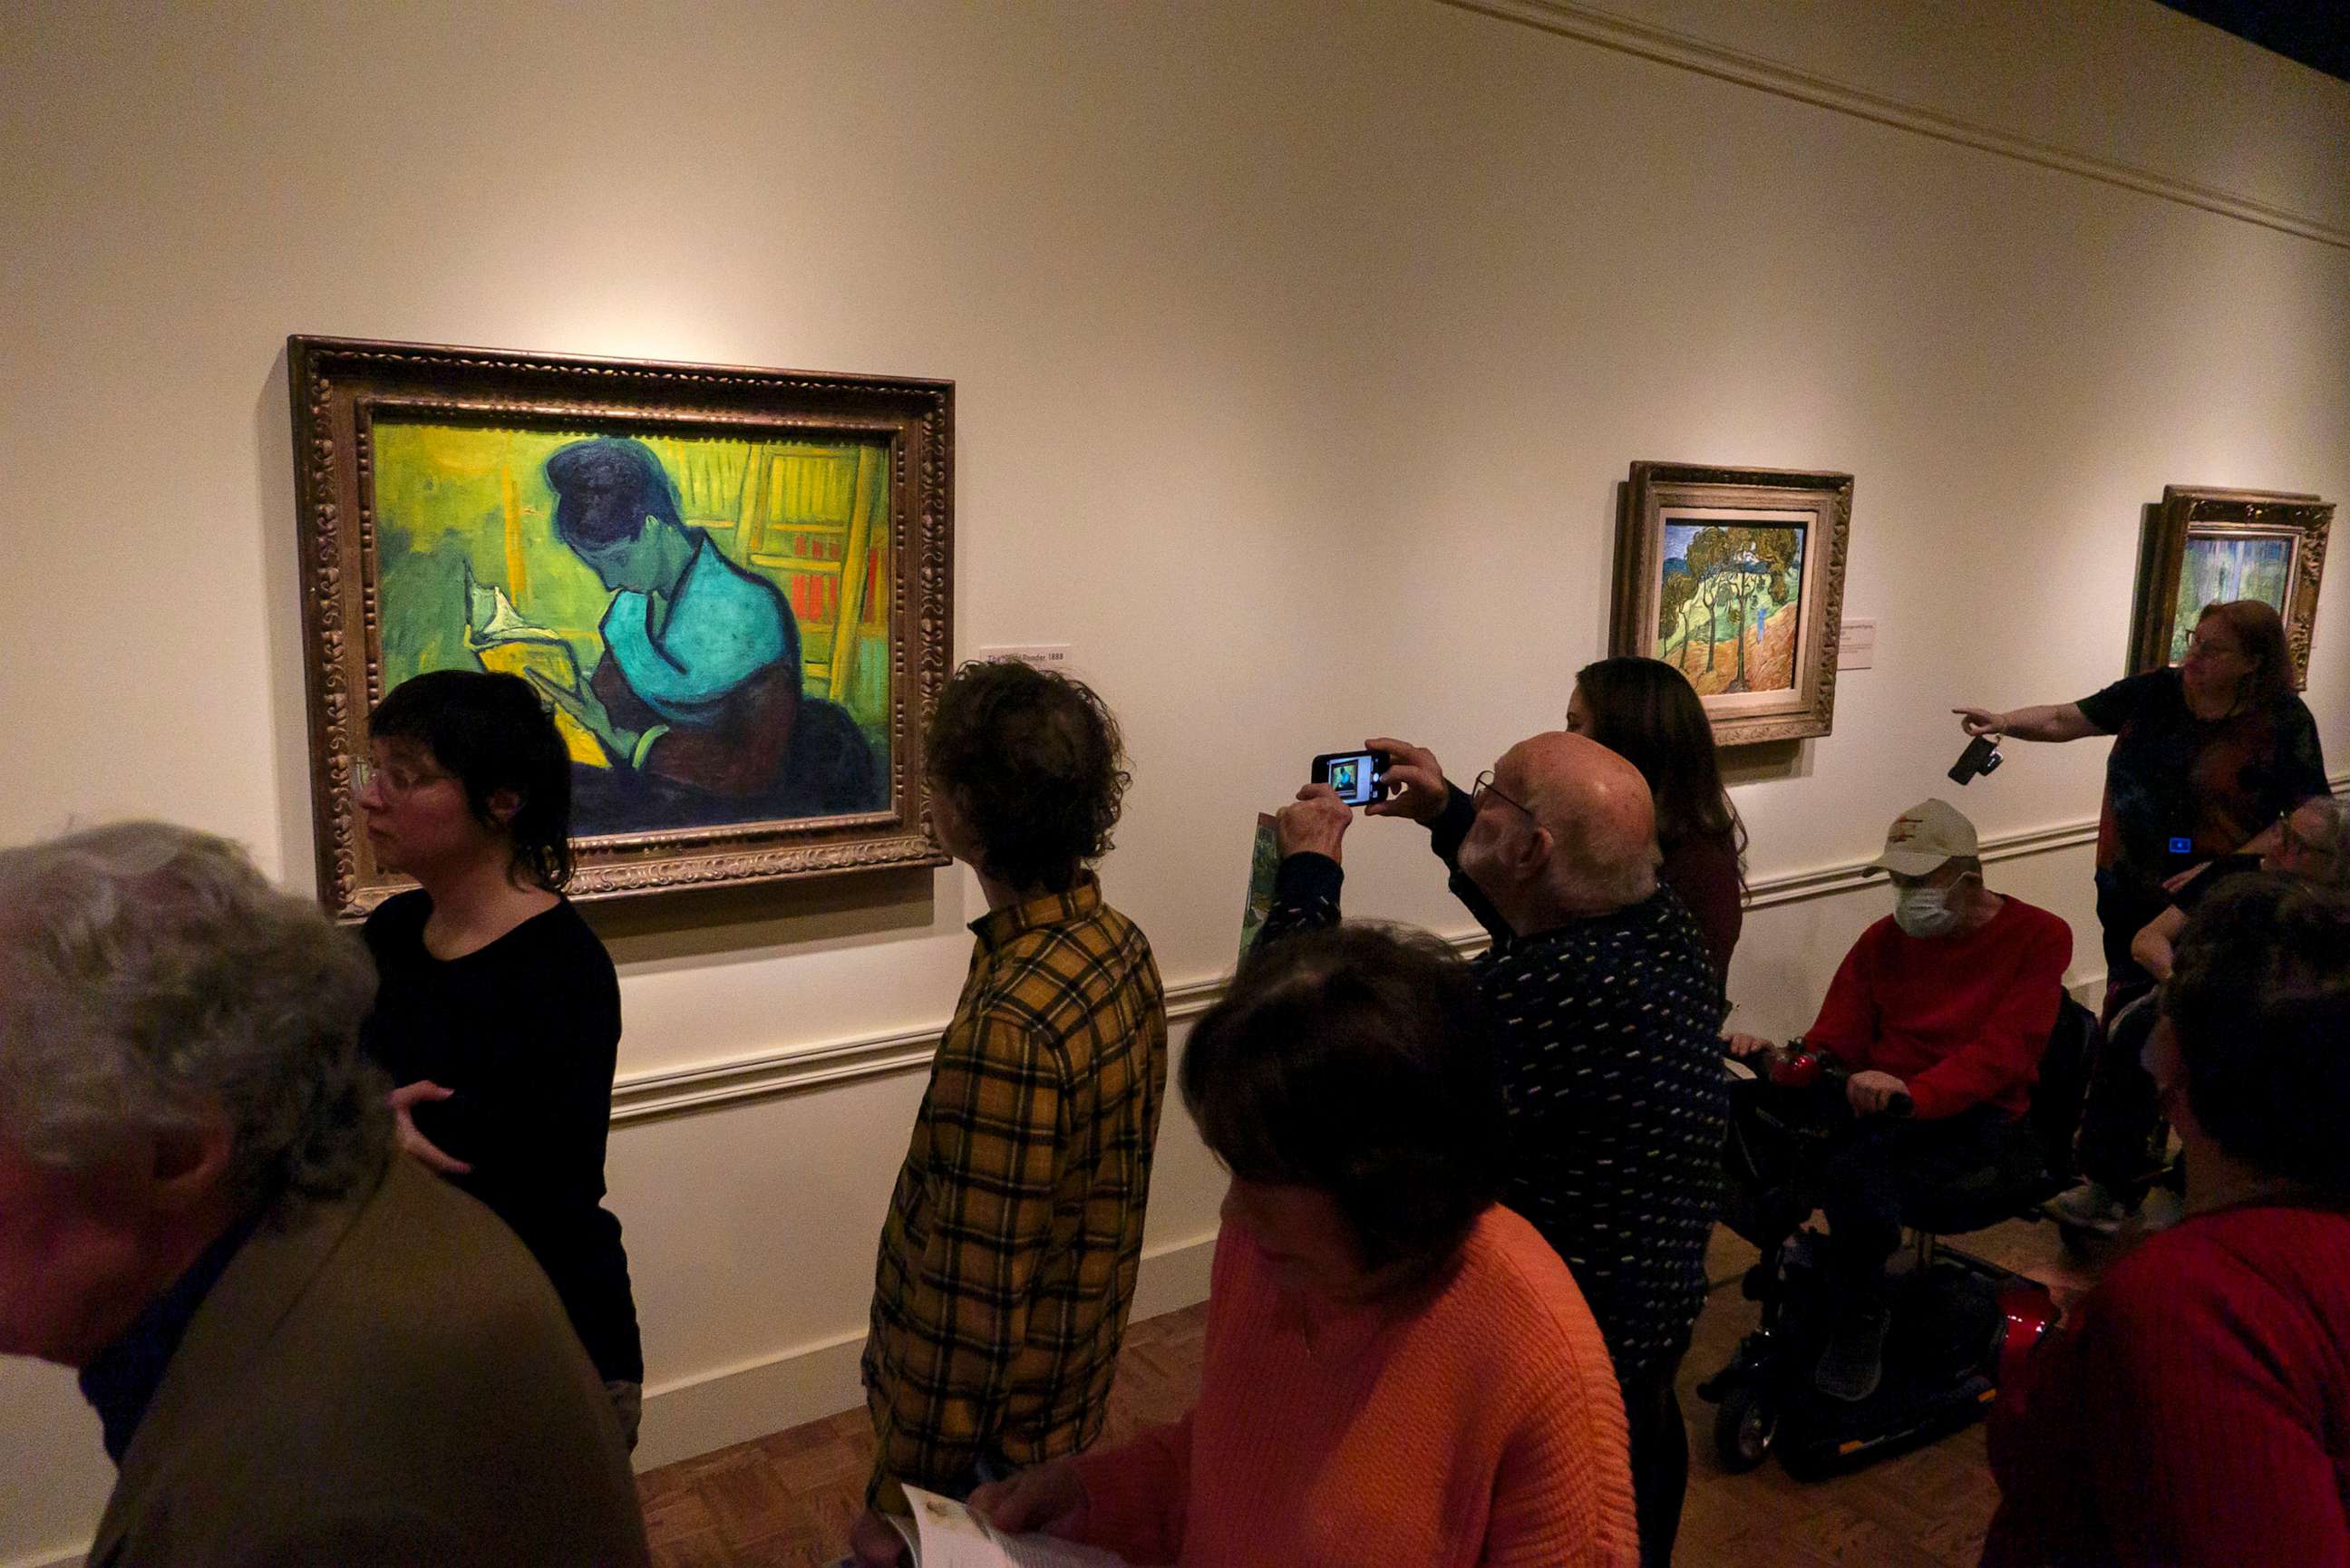 PHOTO: Visitors file past at the Van Gogh painting "Une Liseuse De Romans", also known as "The Novel Reader", during the Van Gogh in America exhibit at the Detroit Institute of Arts, Jan. 11, 2023, in Detroit.